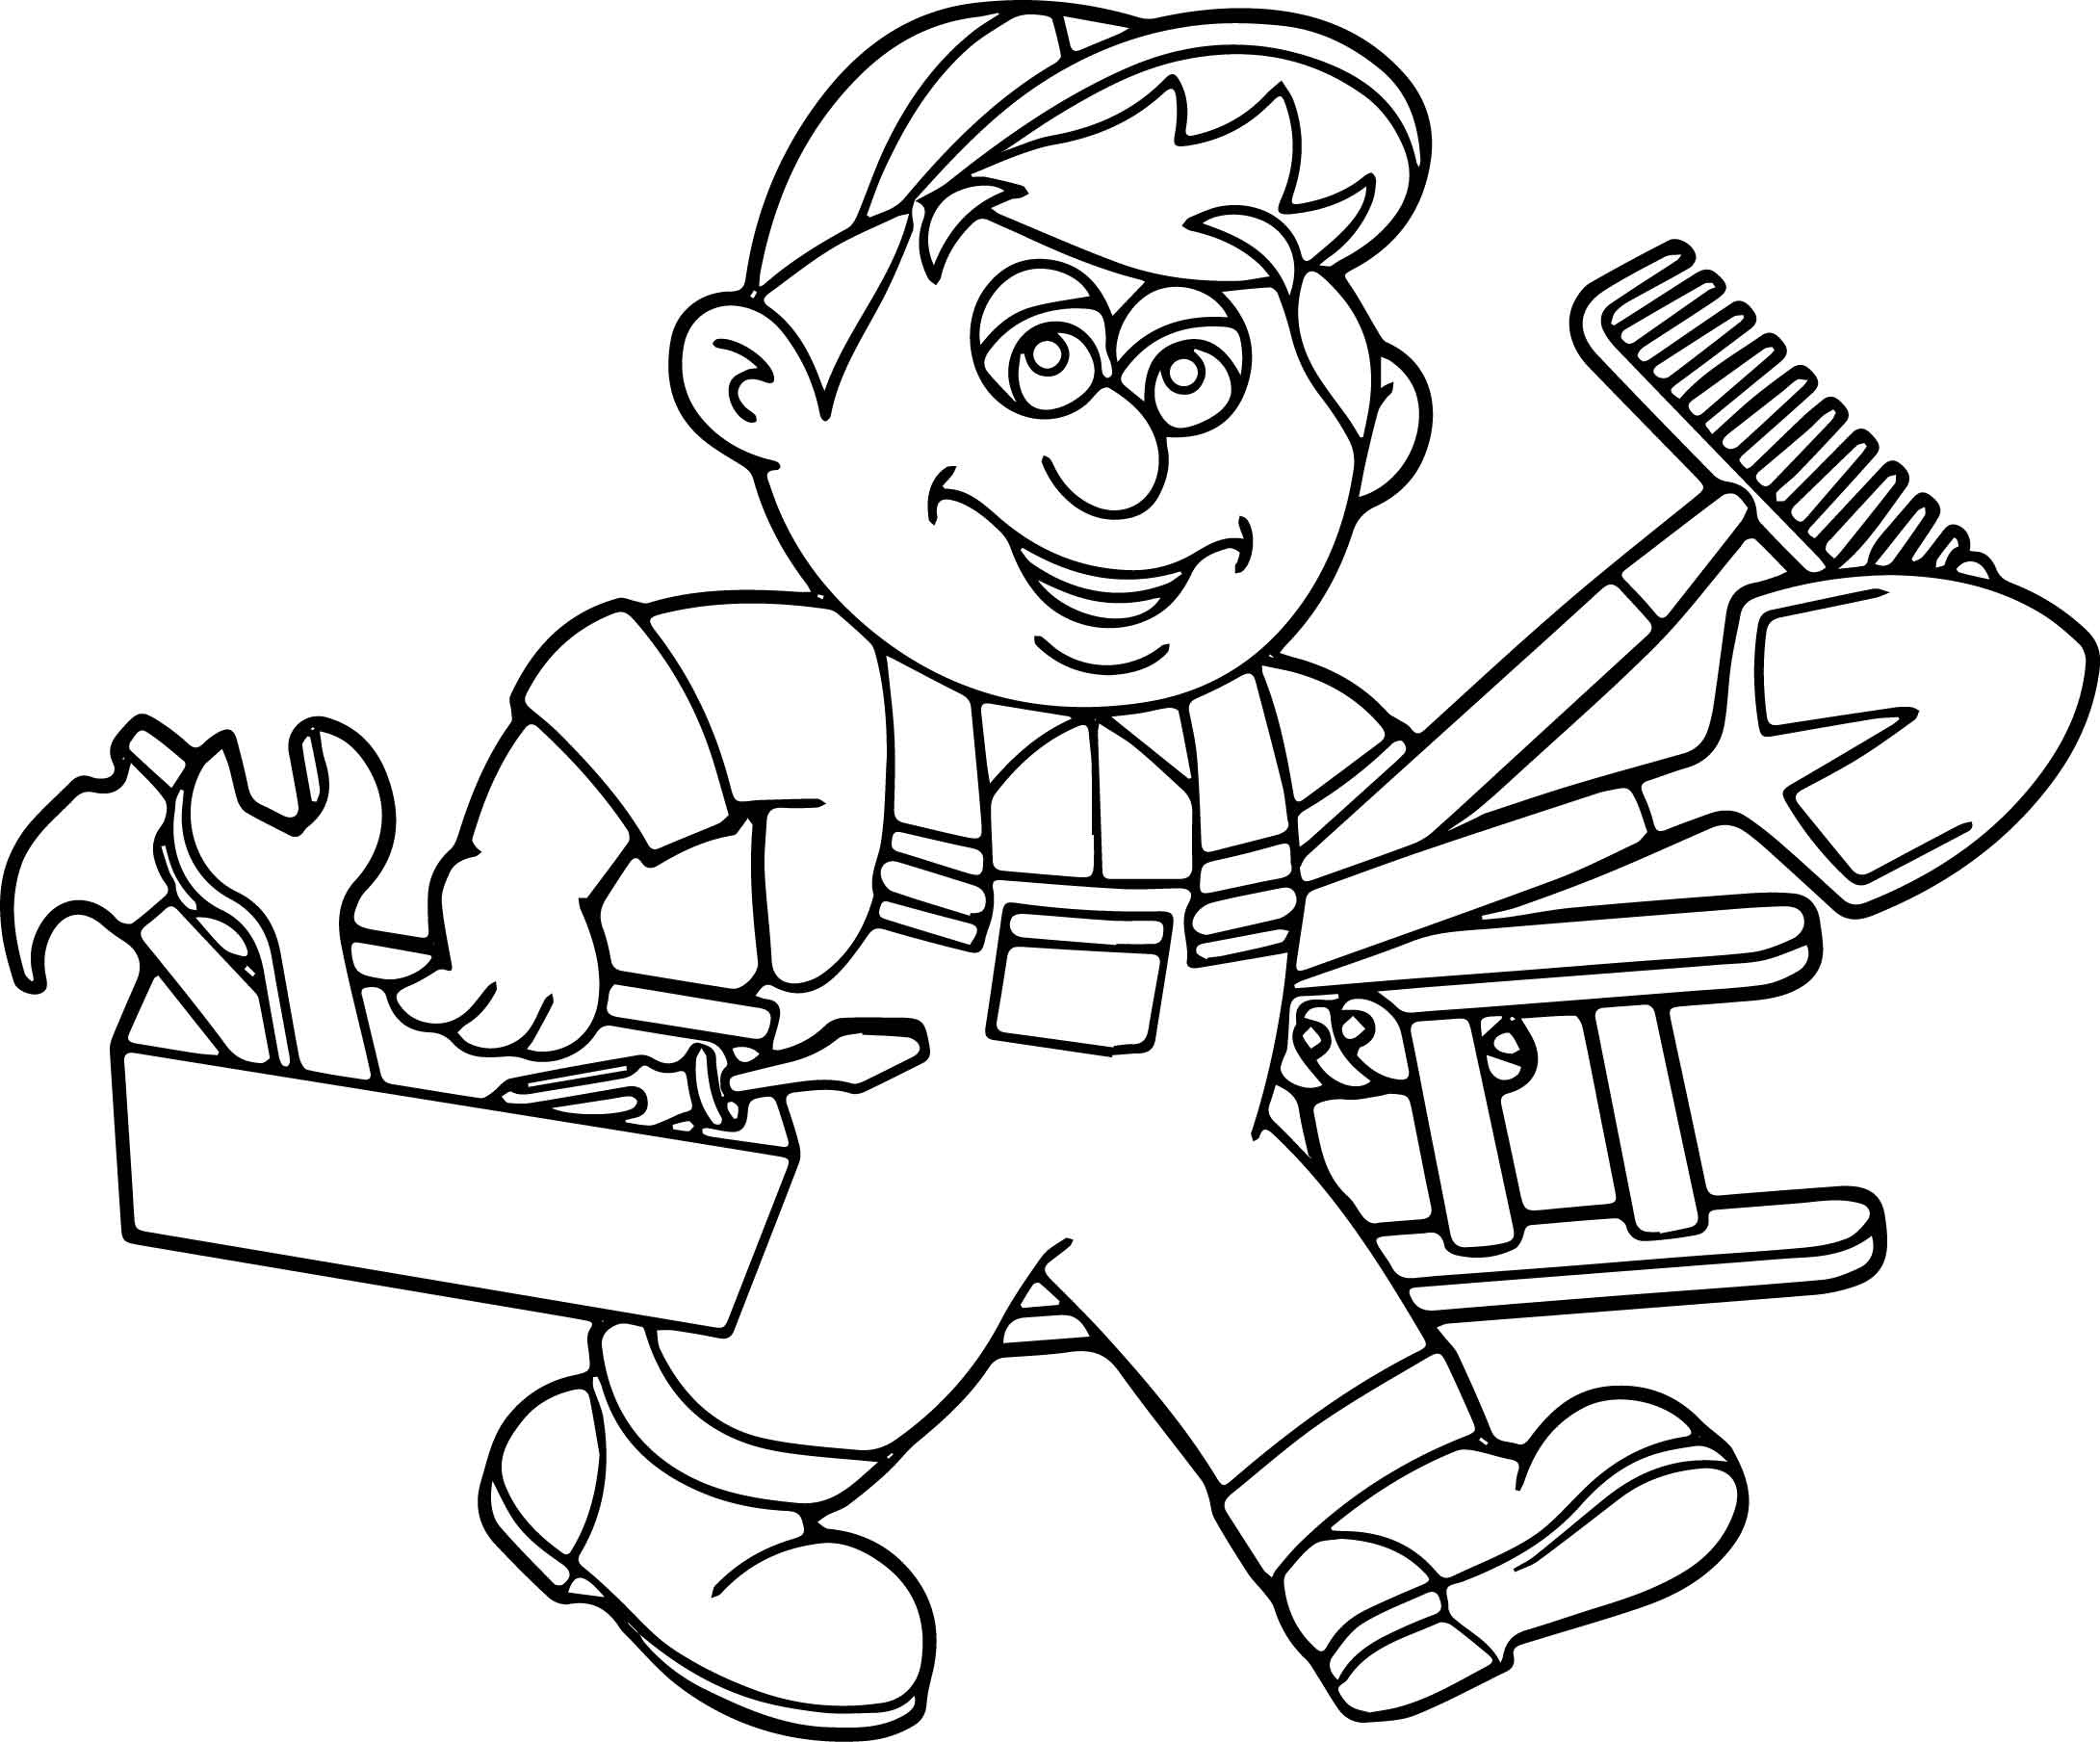 carpenter-tools-coloring-pages-page-1-line-17qq-coloring-home